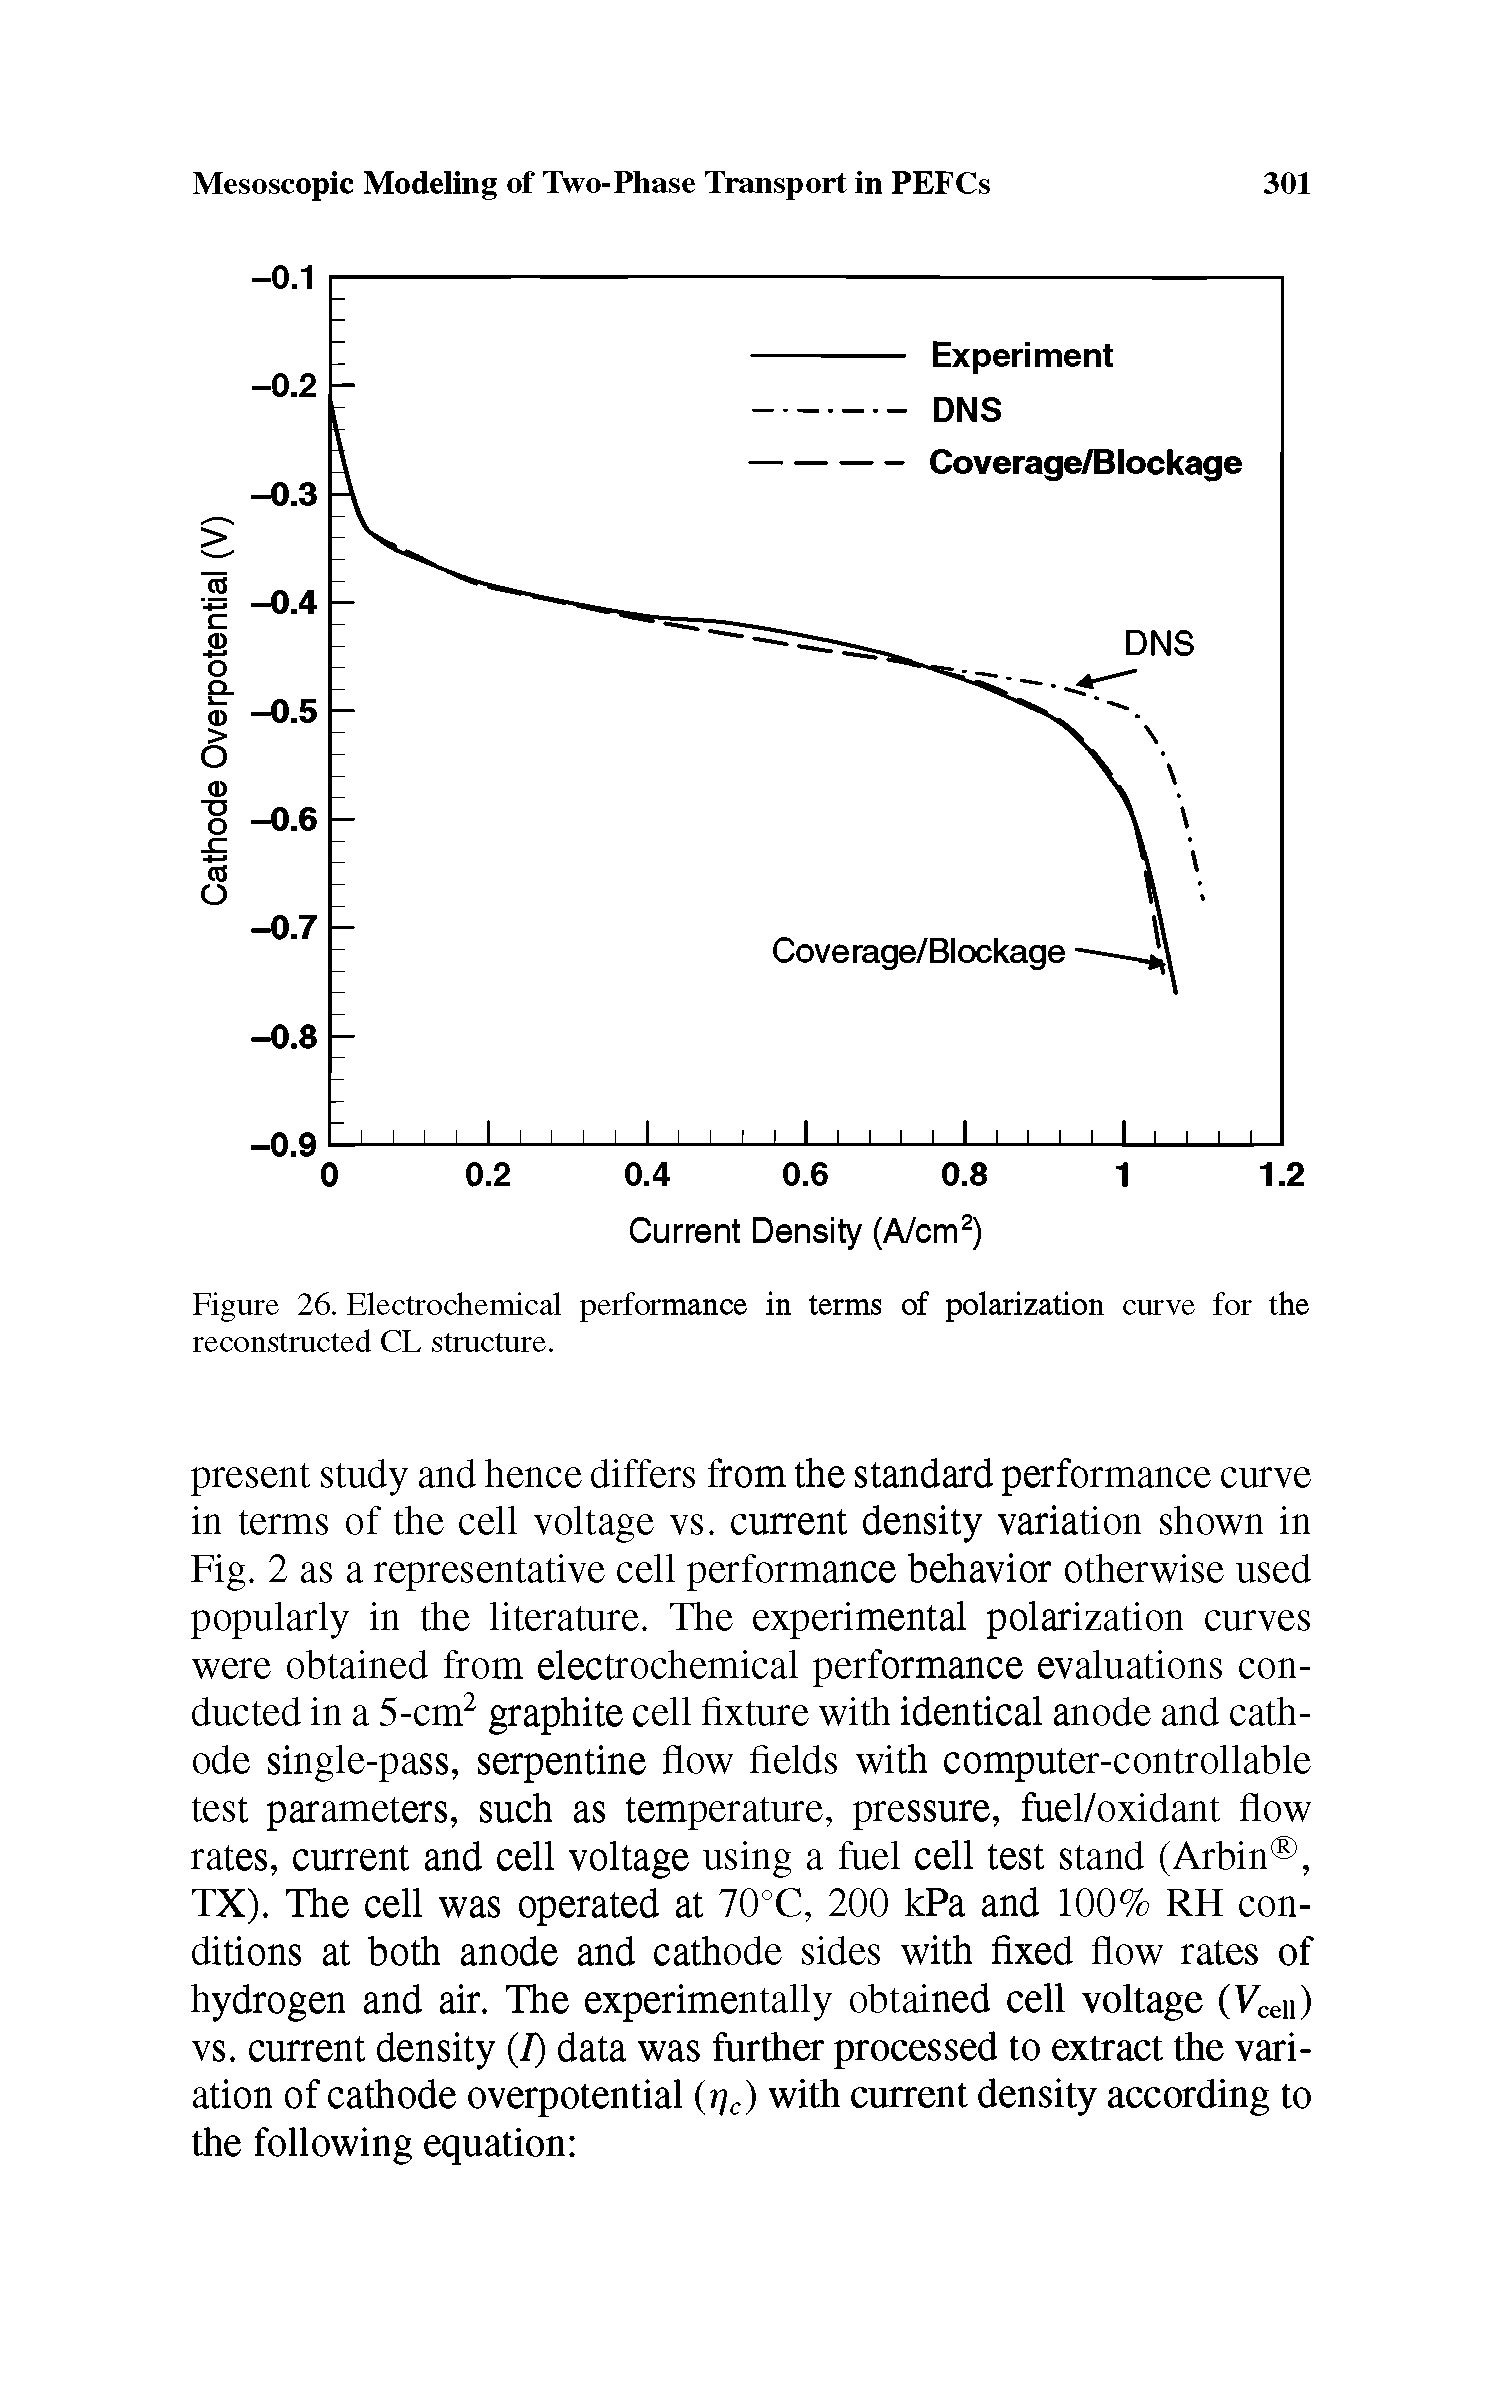 Figure 26. Electrochemical performance in terms of polarization curve for the reconstructed CL structure.